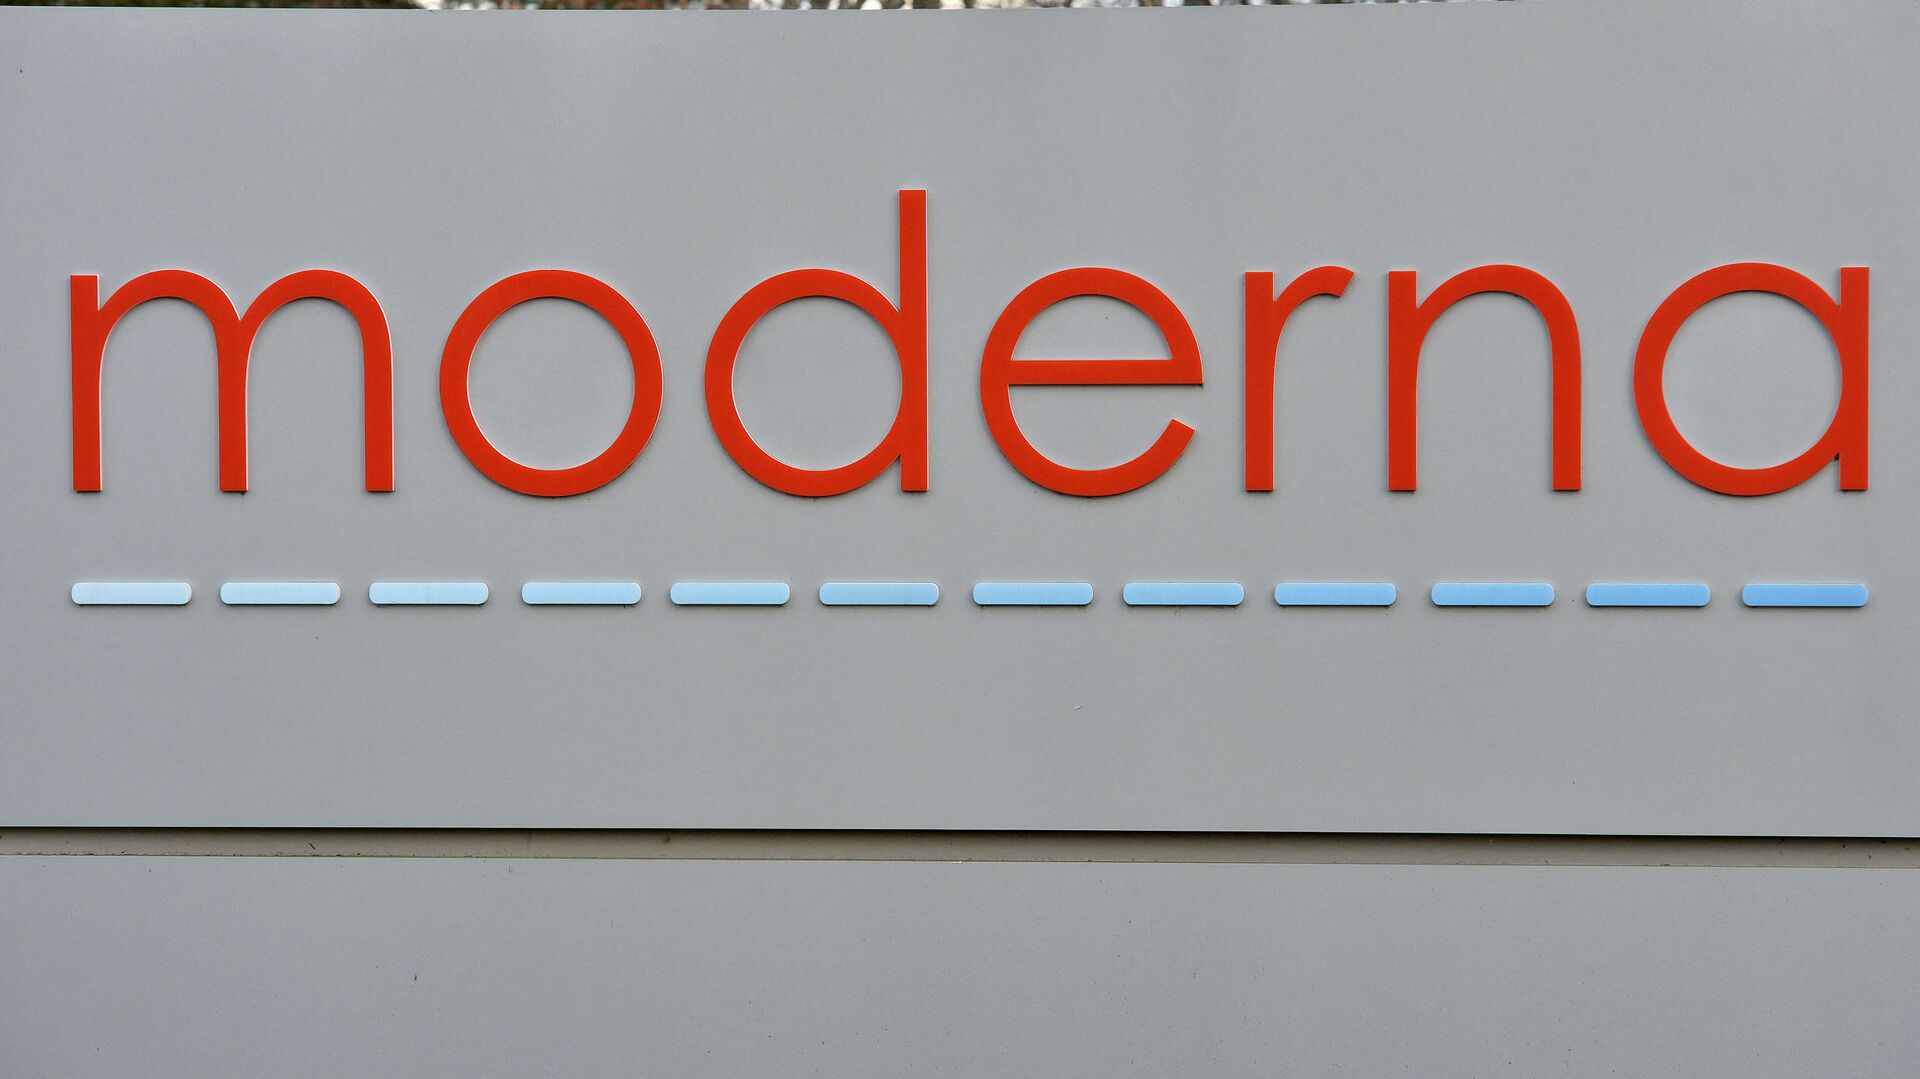 In this file photo the Moderna logo is seen at the Moderna campus in Norwood, Massachusetts on on December 2, 2020, where the biotechnology company is mass producing its Covid-19 vaccine. - US biotech firm Moderna said on July 7, 2021 it had dosed its first participants in a human study of an mRNA vaccine that targets multiple strains of influenza. The company intends to recruit 180 adults in the United States for the Phase 1/2 portion of the trial to evaluate the safety and strength of immune response to the shot, called mRNA-1010. - Sputnik International, 1920, 07.07.2021